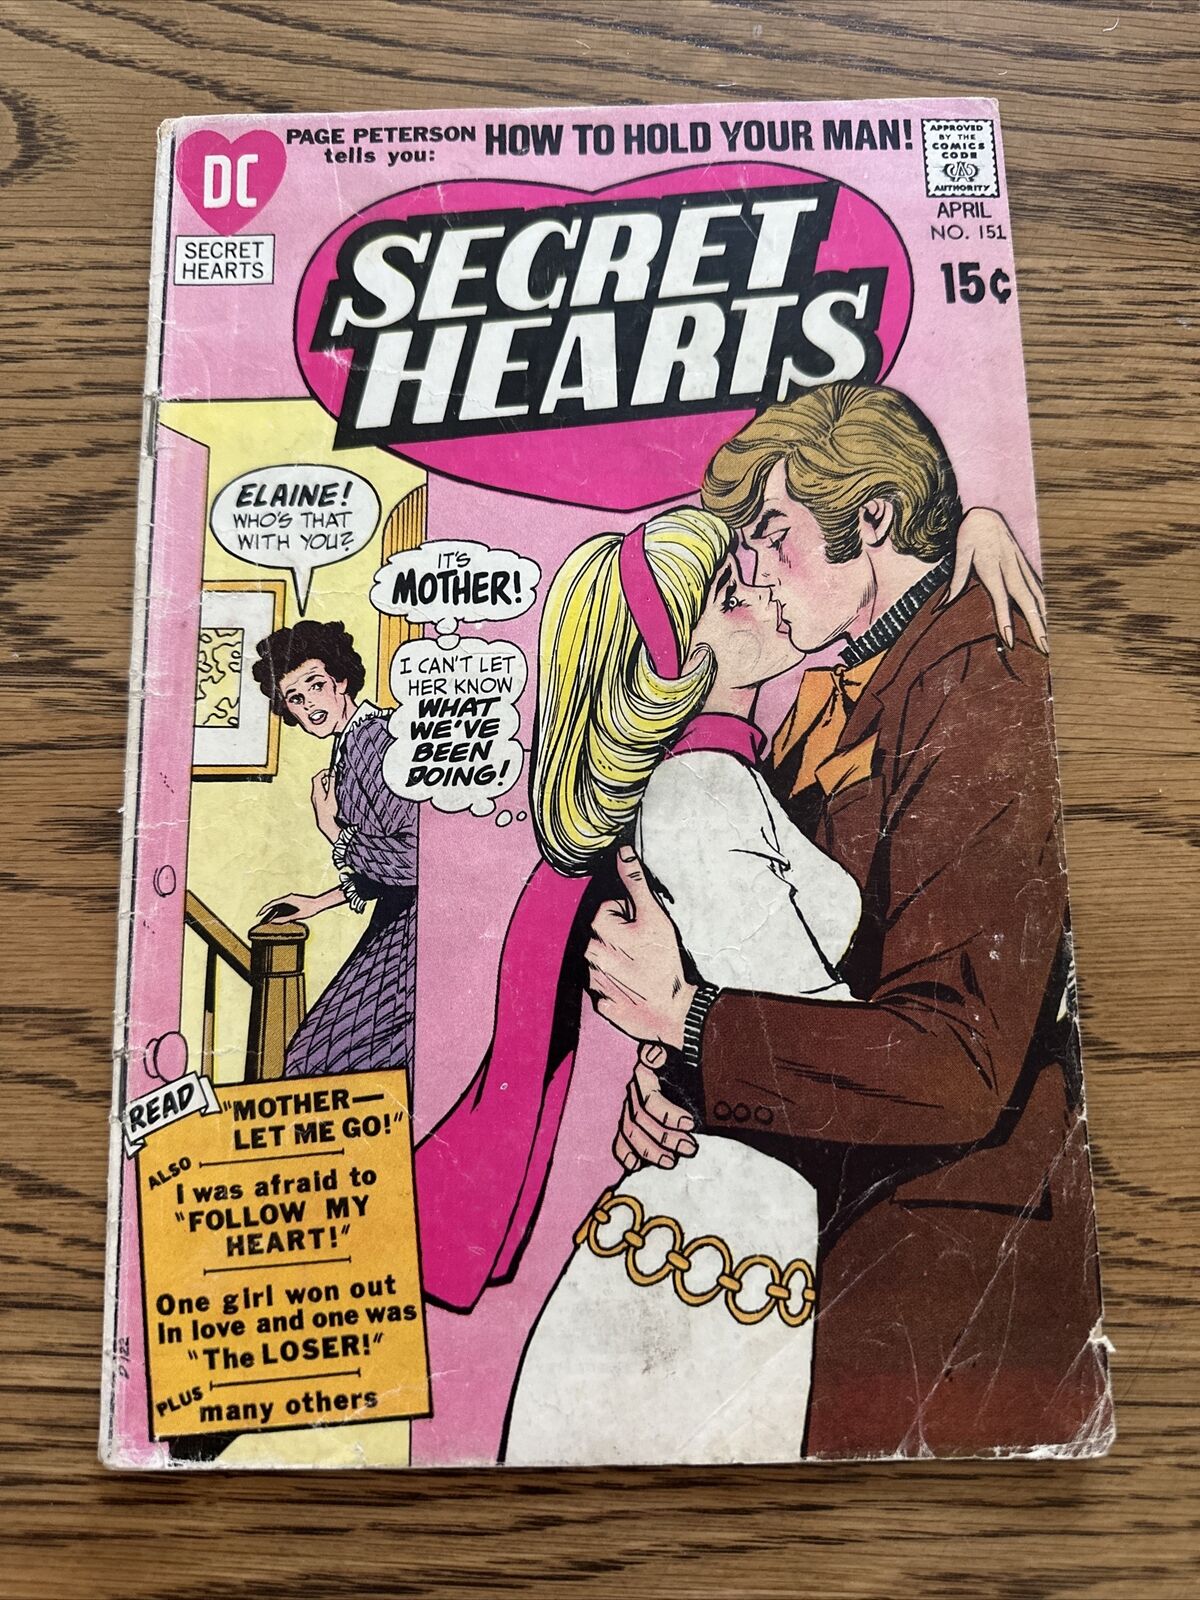 Secret Hearts #151 (DC Comics 1971) How To Hold Your Man Romance VG-